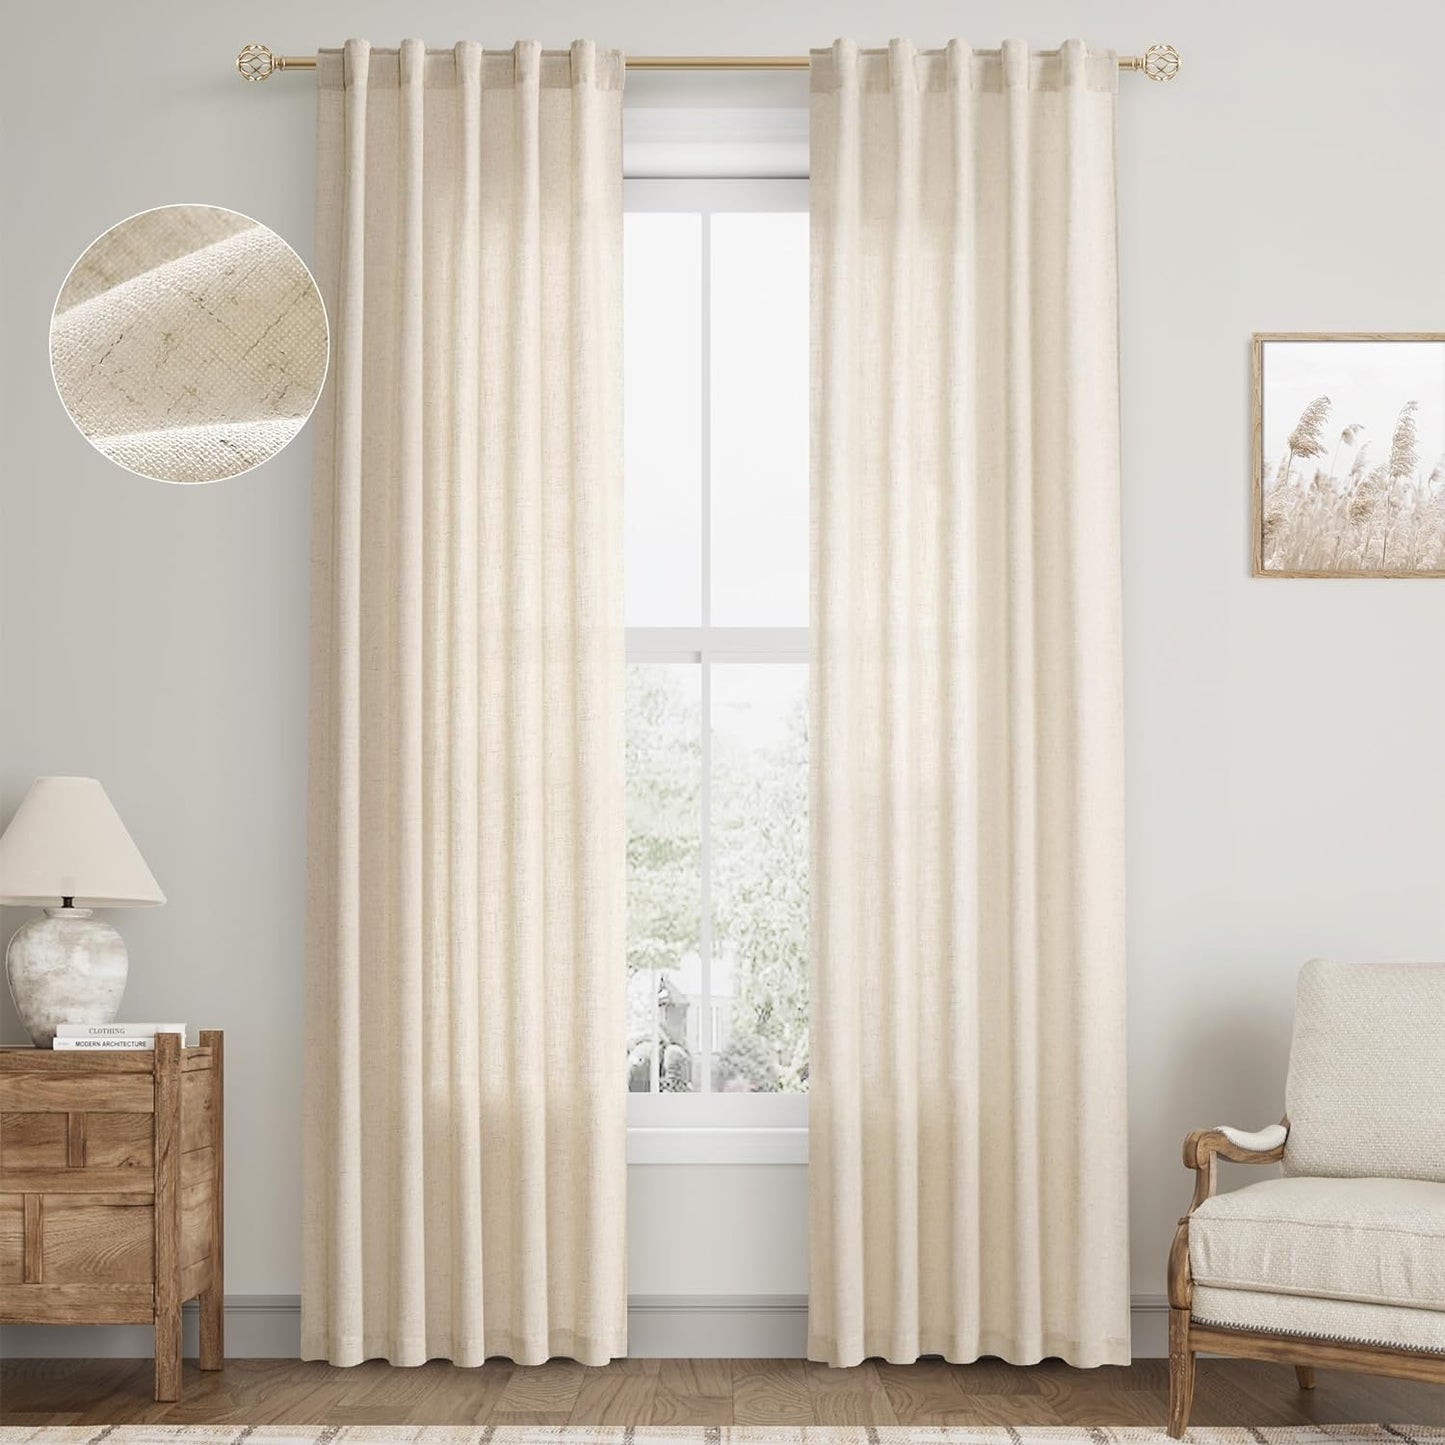 Natural Linen Sheer Curtains 84 Inch Long for Living Room Bedroom Back Tab Light Filtering Privacy Farmhouse Rod Pocket Ivory off White Neutral Drapes with Hooks 2 Panels Cream Beige  SPWIY Cream Beige 40W X 80L Inch X 2 Panels 